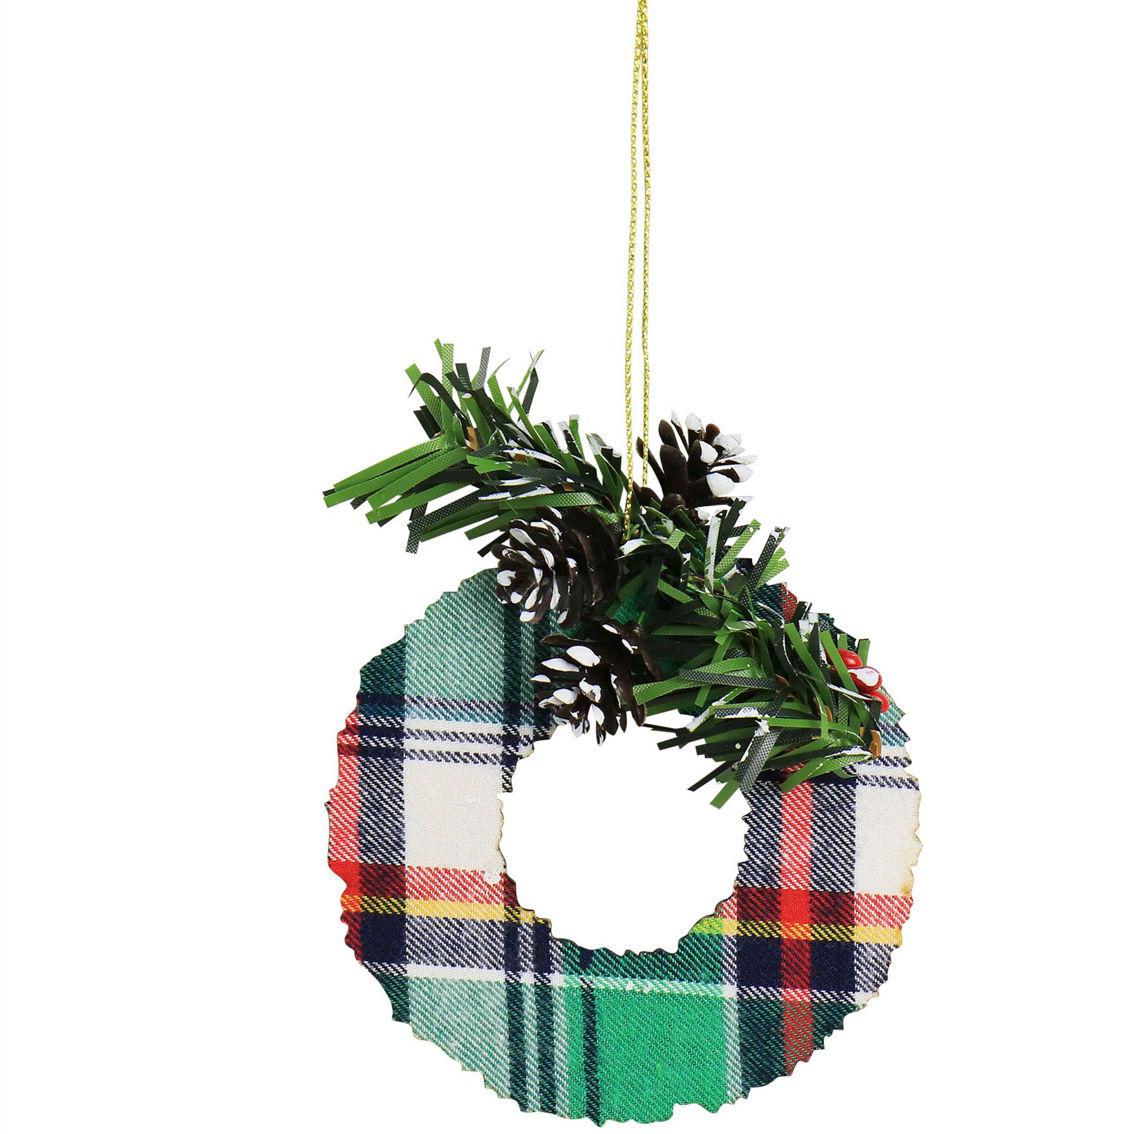 Martha Stewart Holiday Wreath Ornament 4 Piece Set in Red and Green - Image 3 of 5